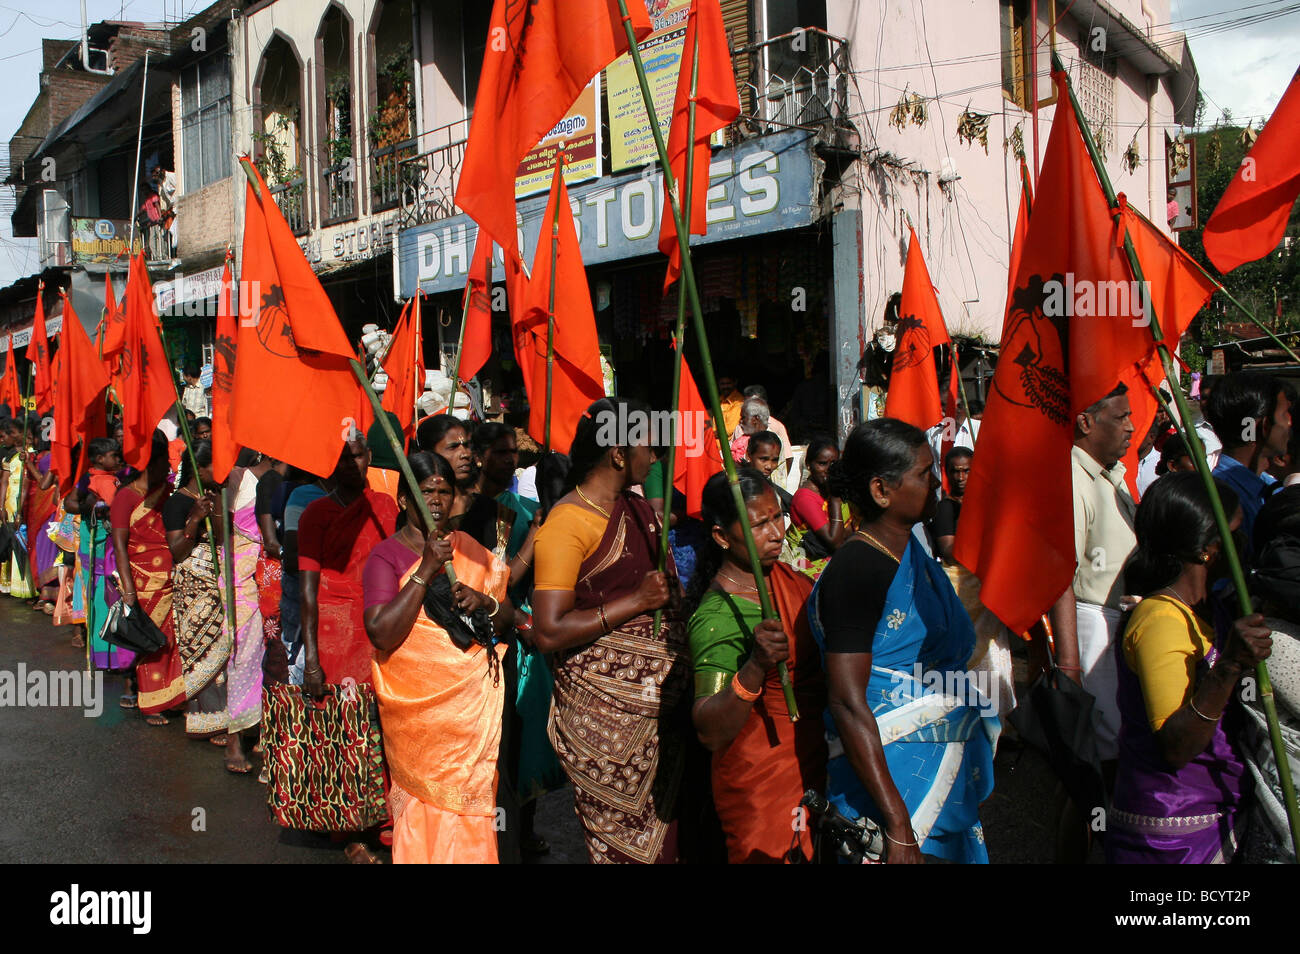 Indian Women Holding Flags At A Street Demonstration, Kerala State Stock Photo